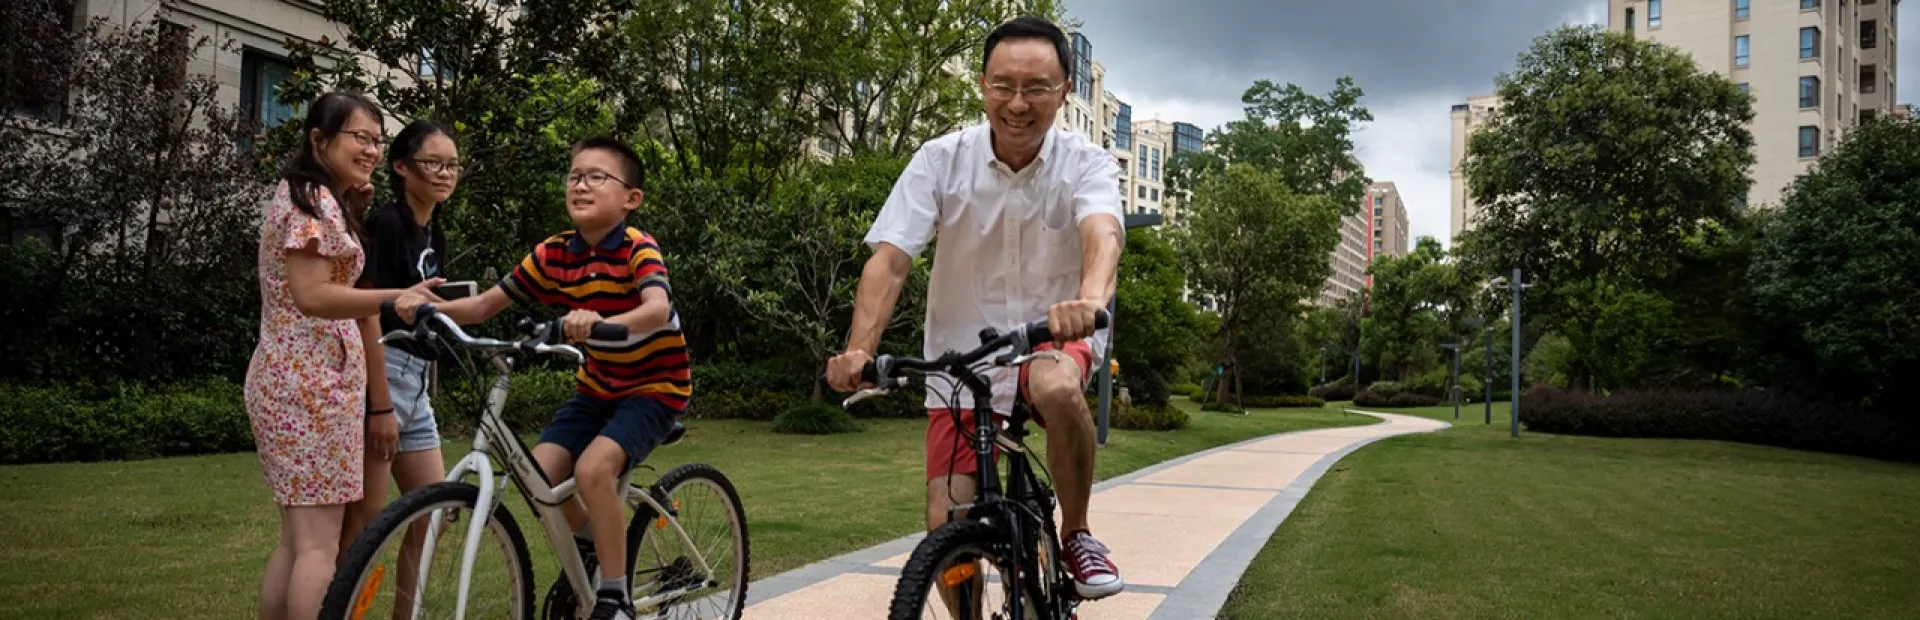 Chinese family embracing exercise and the outdoors